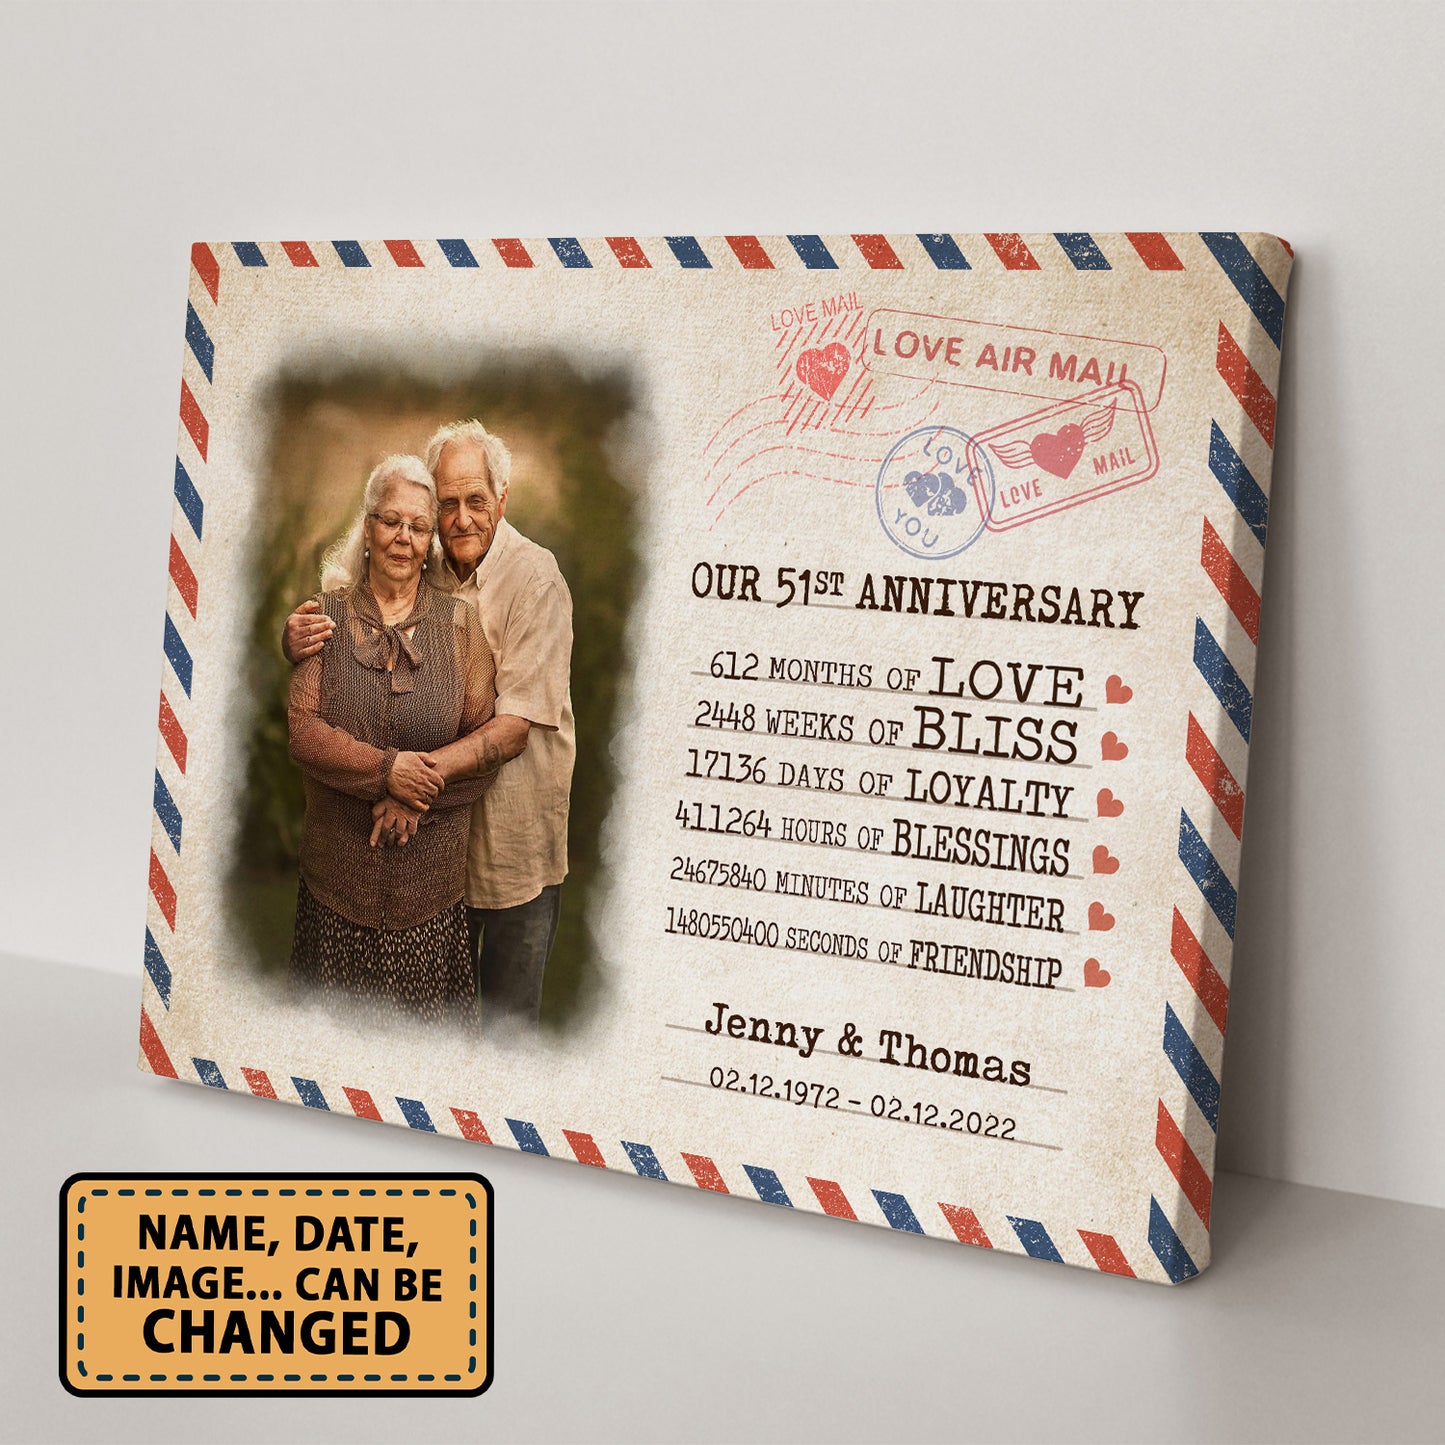 Our 51st Anniversary Letter Valentine Gift Personalized Canvas